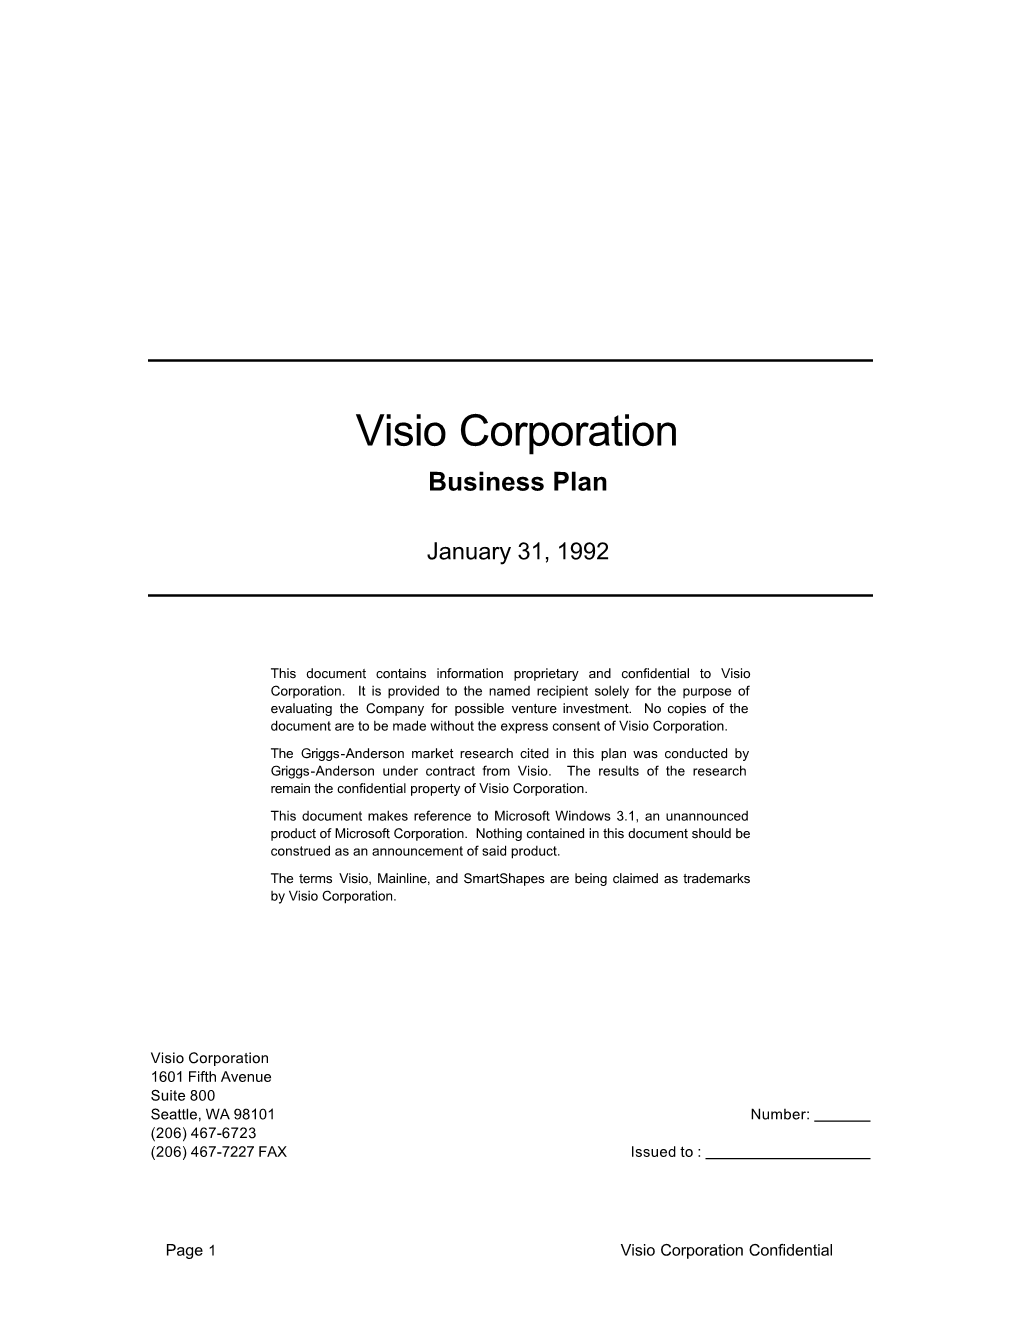 Visio Business Plan from 2Nd Round of Venture Funding (PDF)